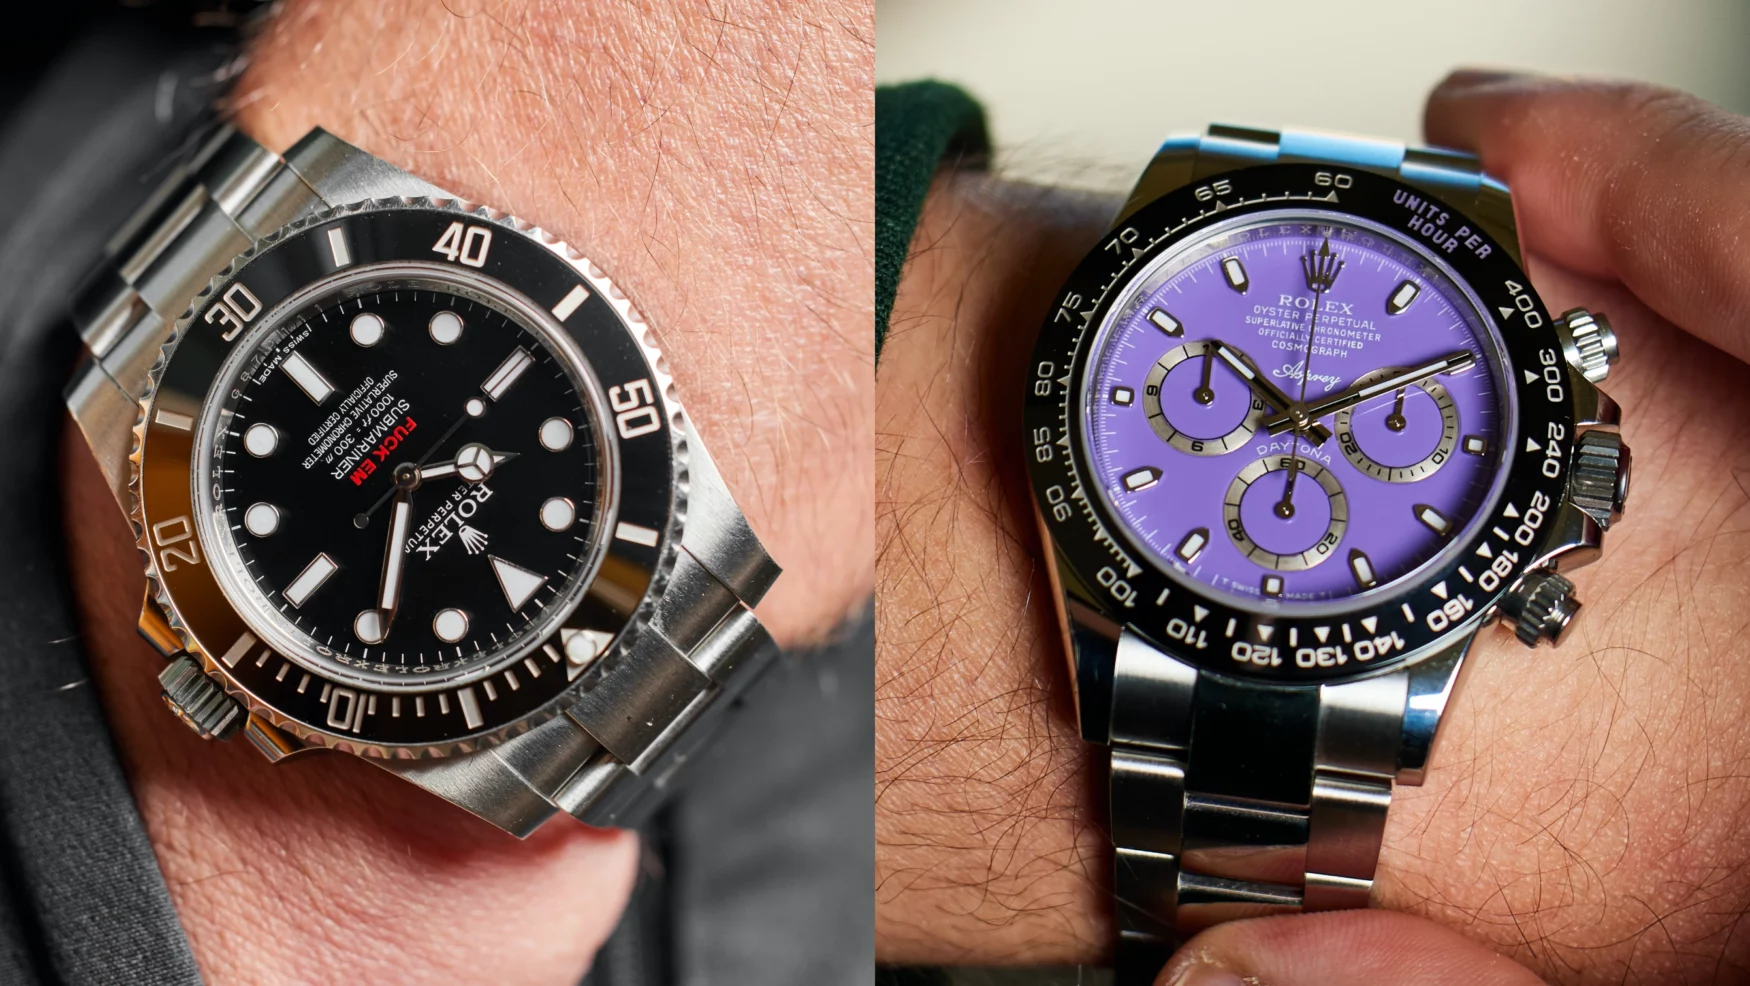 The Supreme Submariner versus the Asprey Daytona – which went for more?